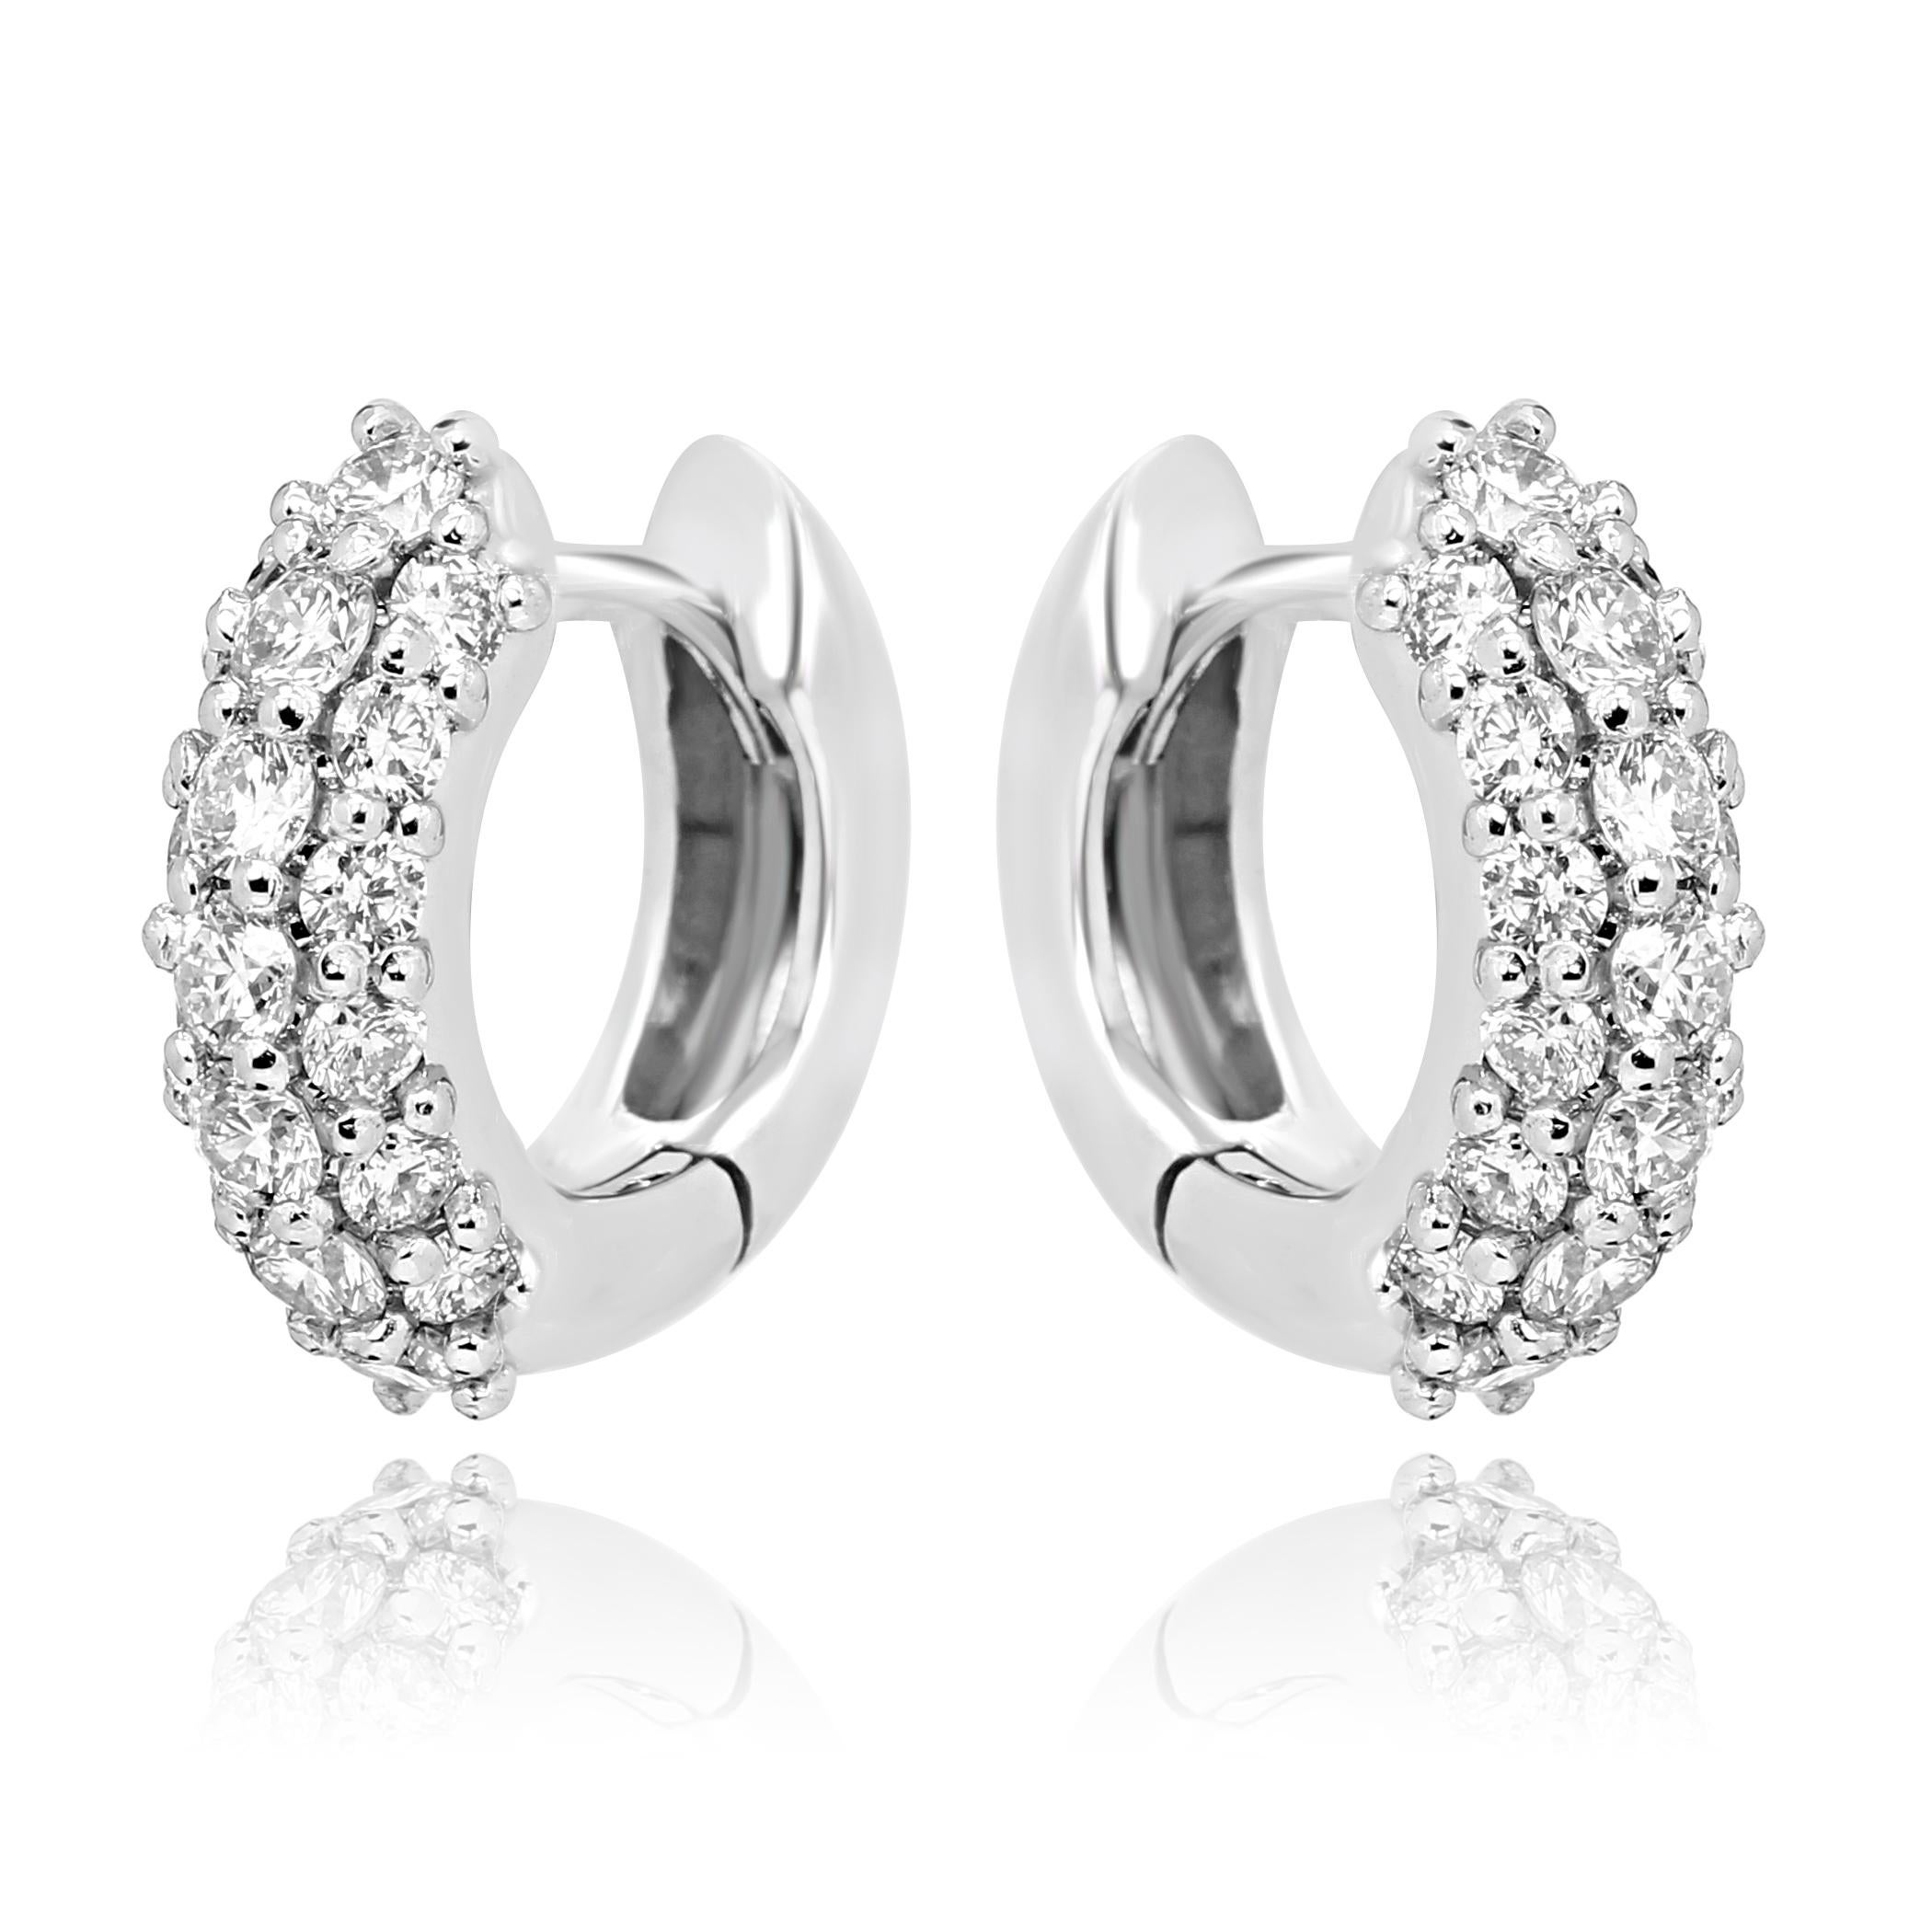 Stunning White G-H Color VS-SI Diamond Round 1.25 Carat set in 14K White Gold Fashion Huggies Hoop Everyday Wear Earring.

Style available in different price ranges. Prices are based on your selection of 4C's i.e Cut, Color, Carat, Clarity. Please